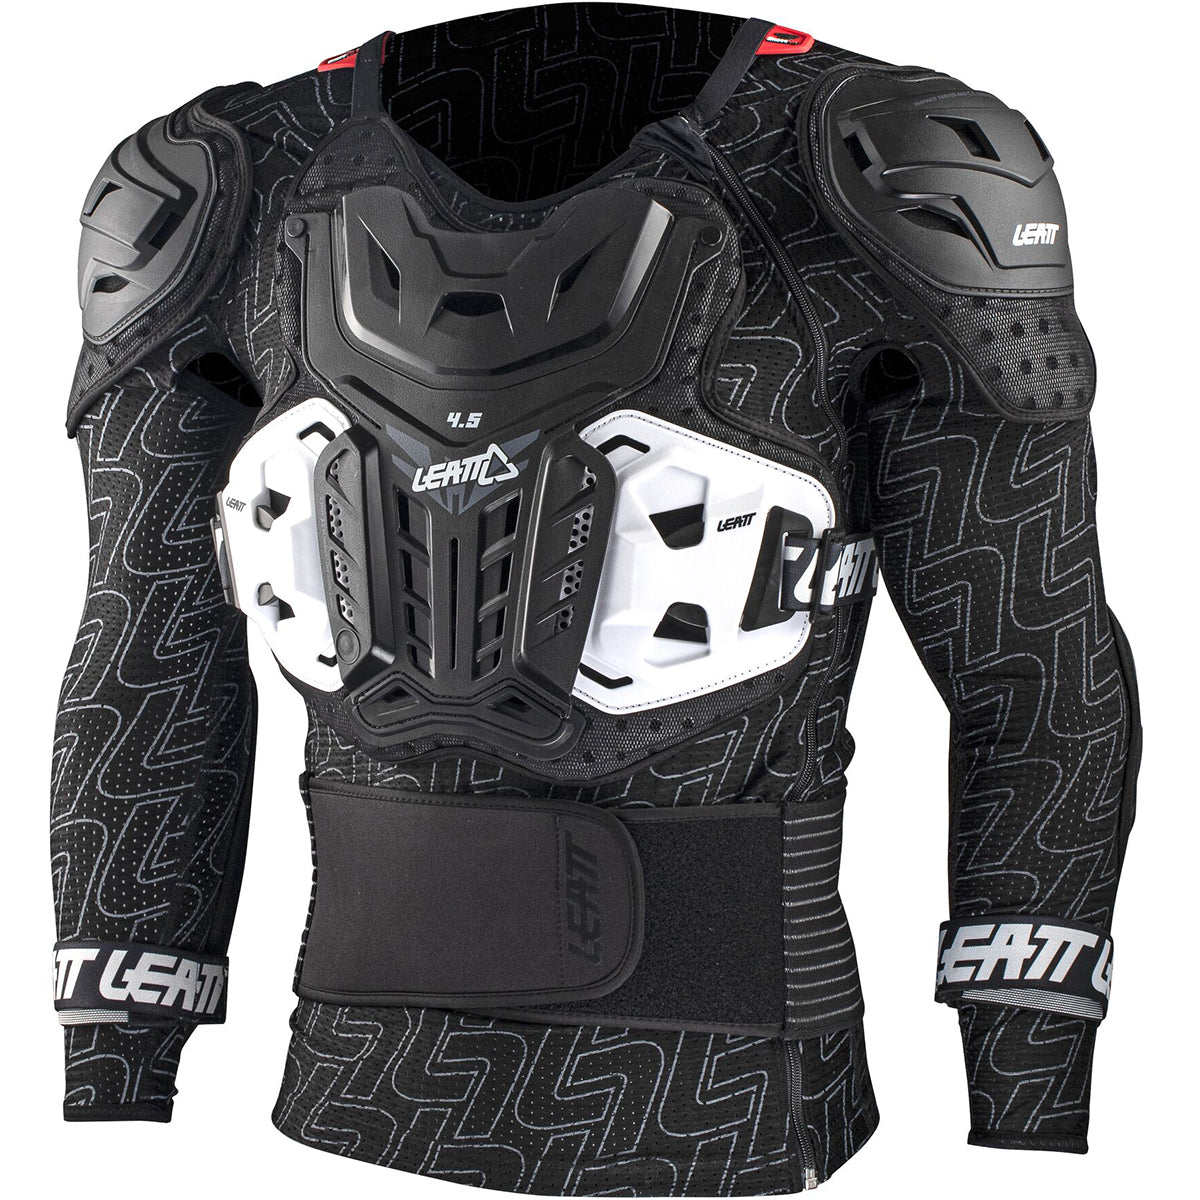 Leatt 4.5 Pro Protector Adult Off-Road Body Armor-5021400140